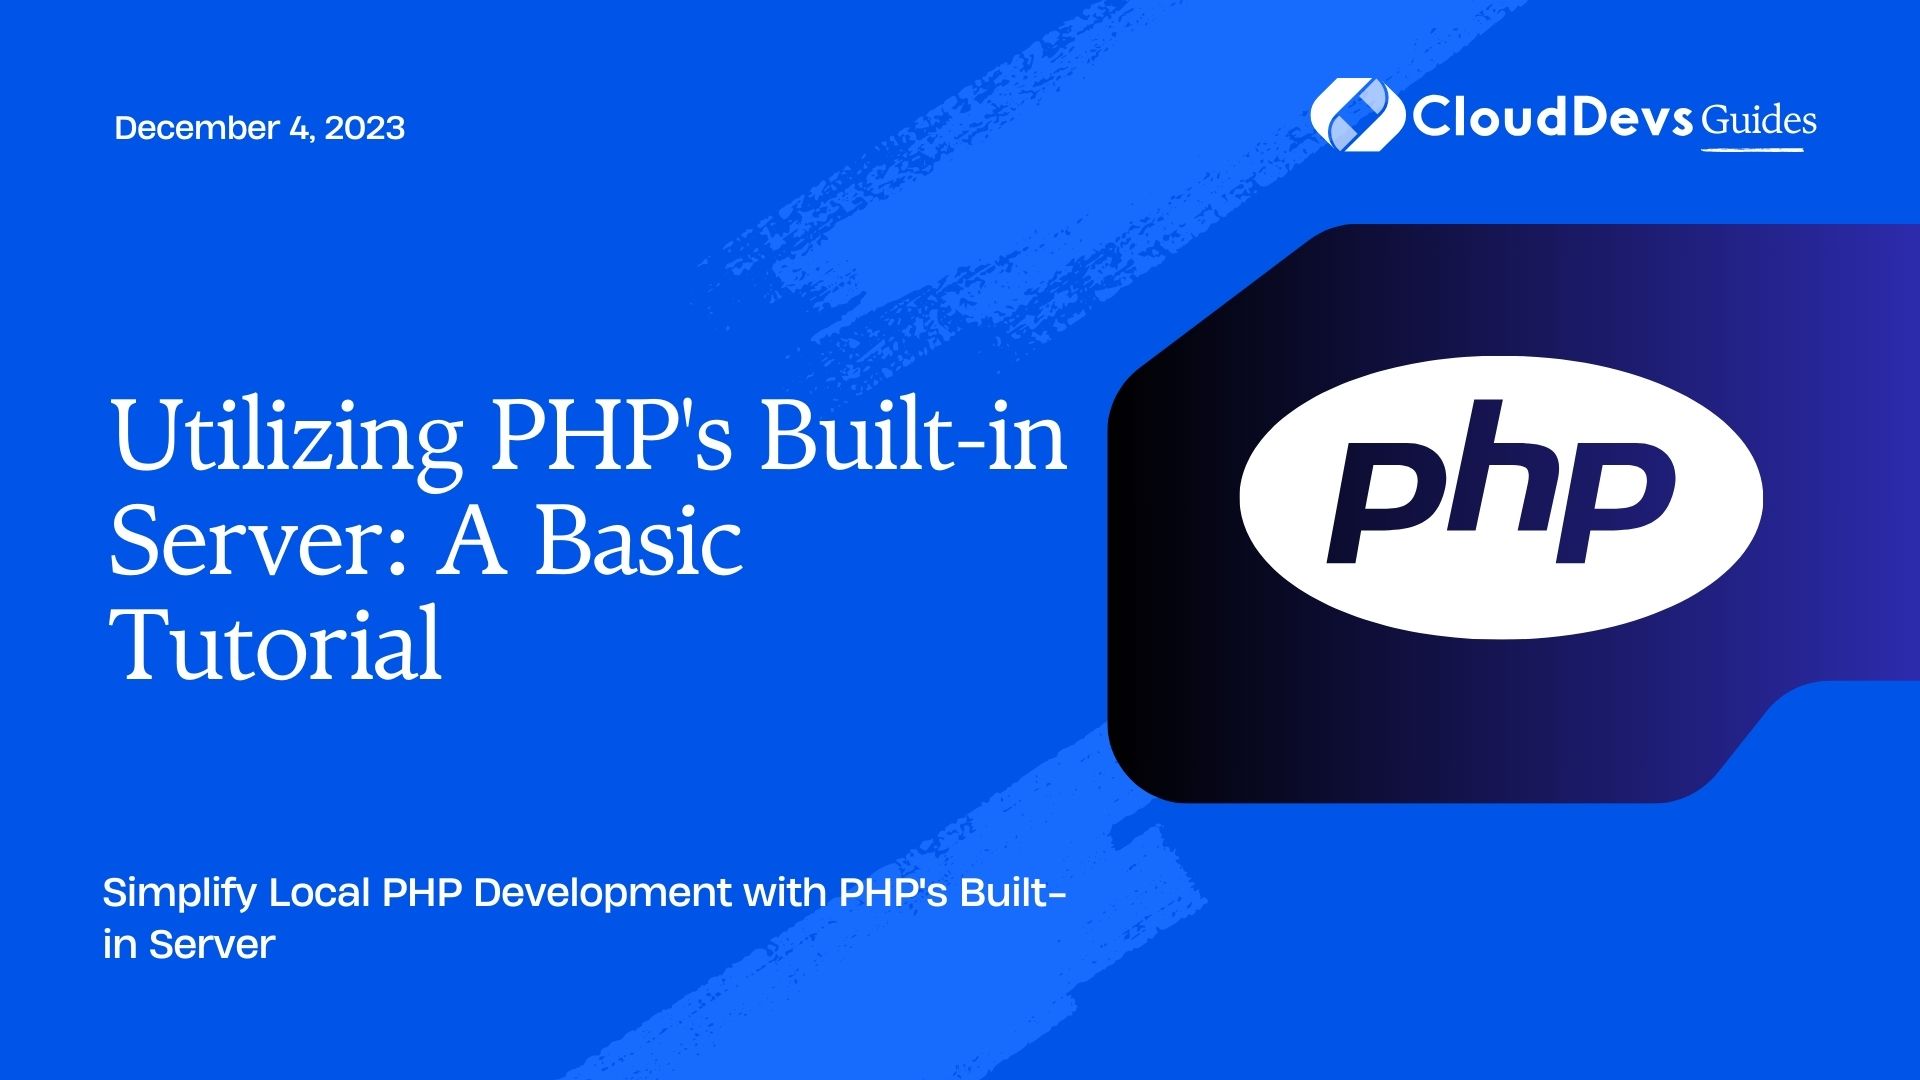 Utilizing PHP's Built-in Server: A Basic Tutorial